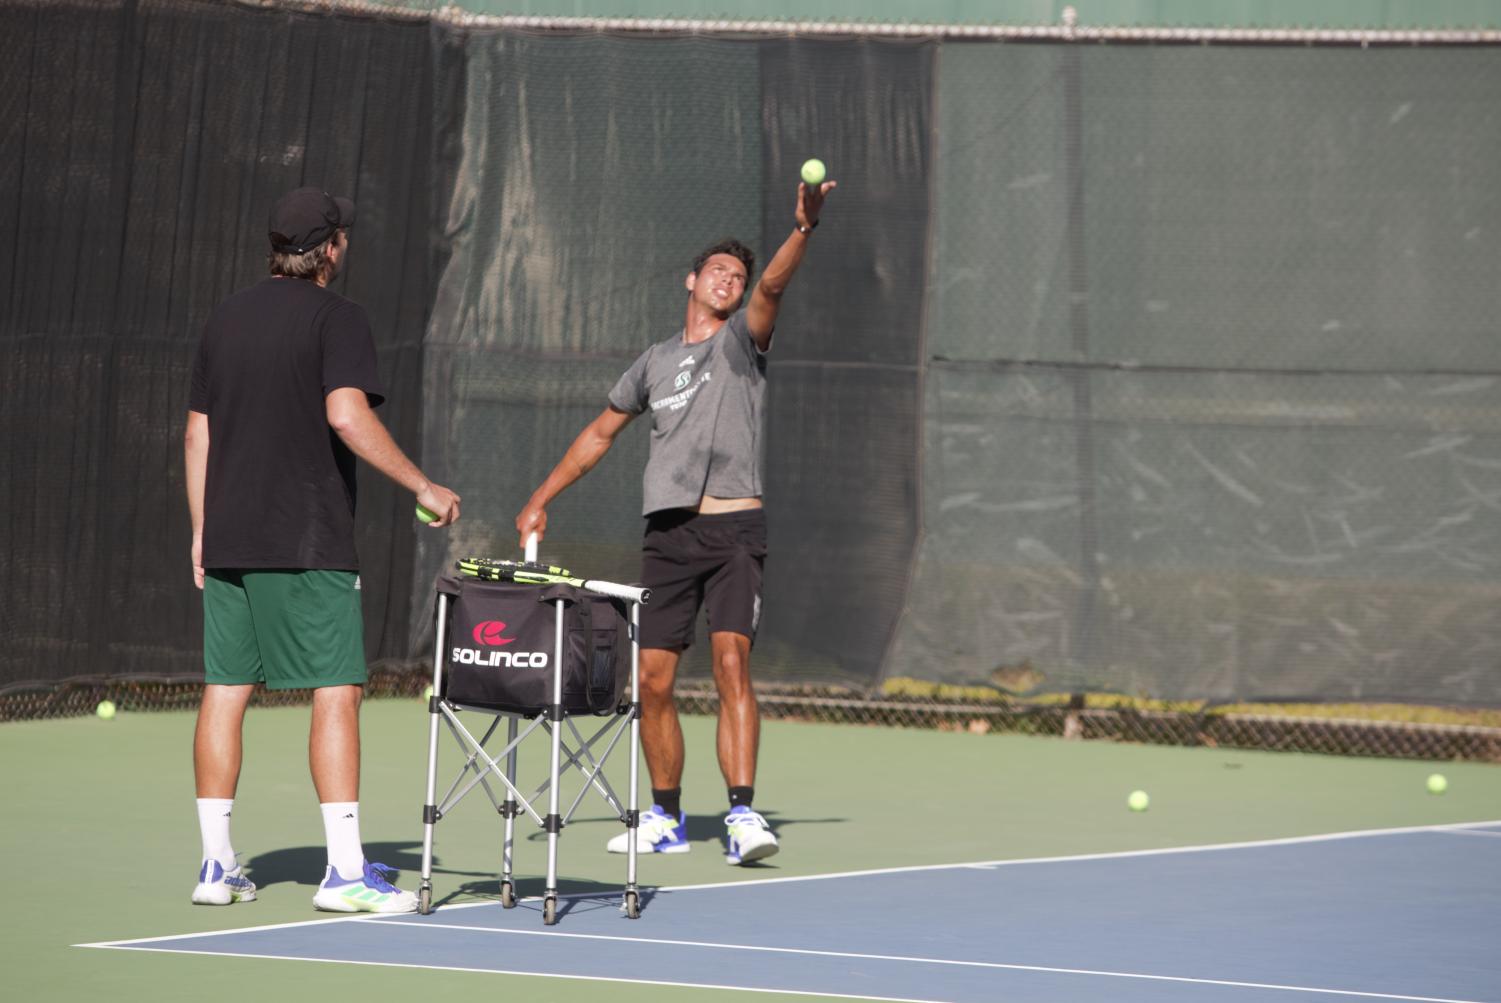  Sac State Sophomore Mark Keki practices his serves with Assistant coach Mikus Losbergs, Wednesday, Feb. 9, 2022. Keki and his sophomore partner Mate Voros are 5-0 In Doubles team matches. 
